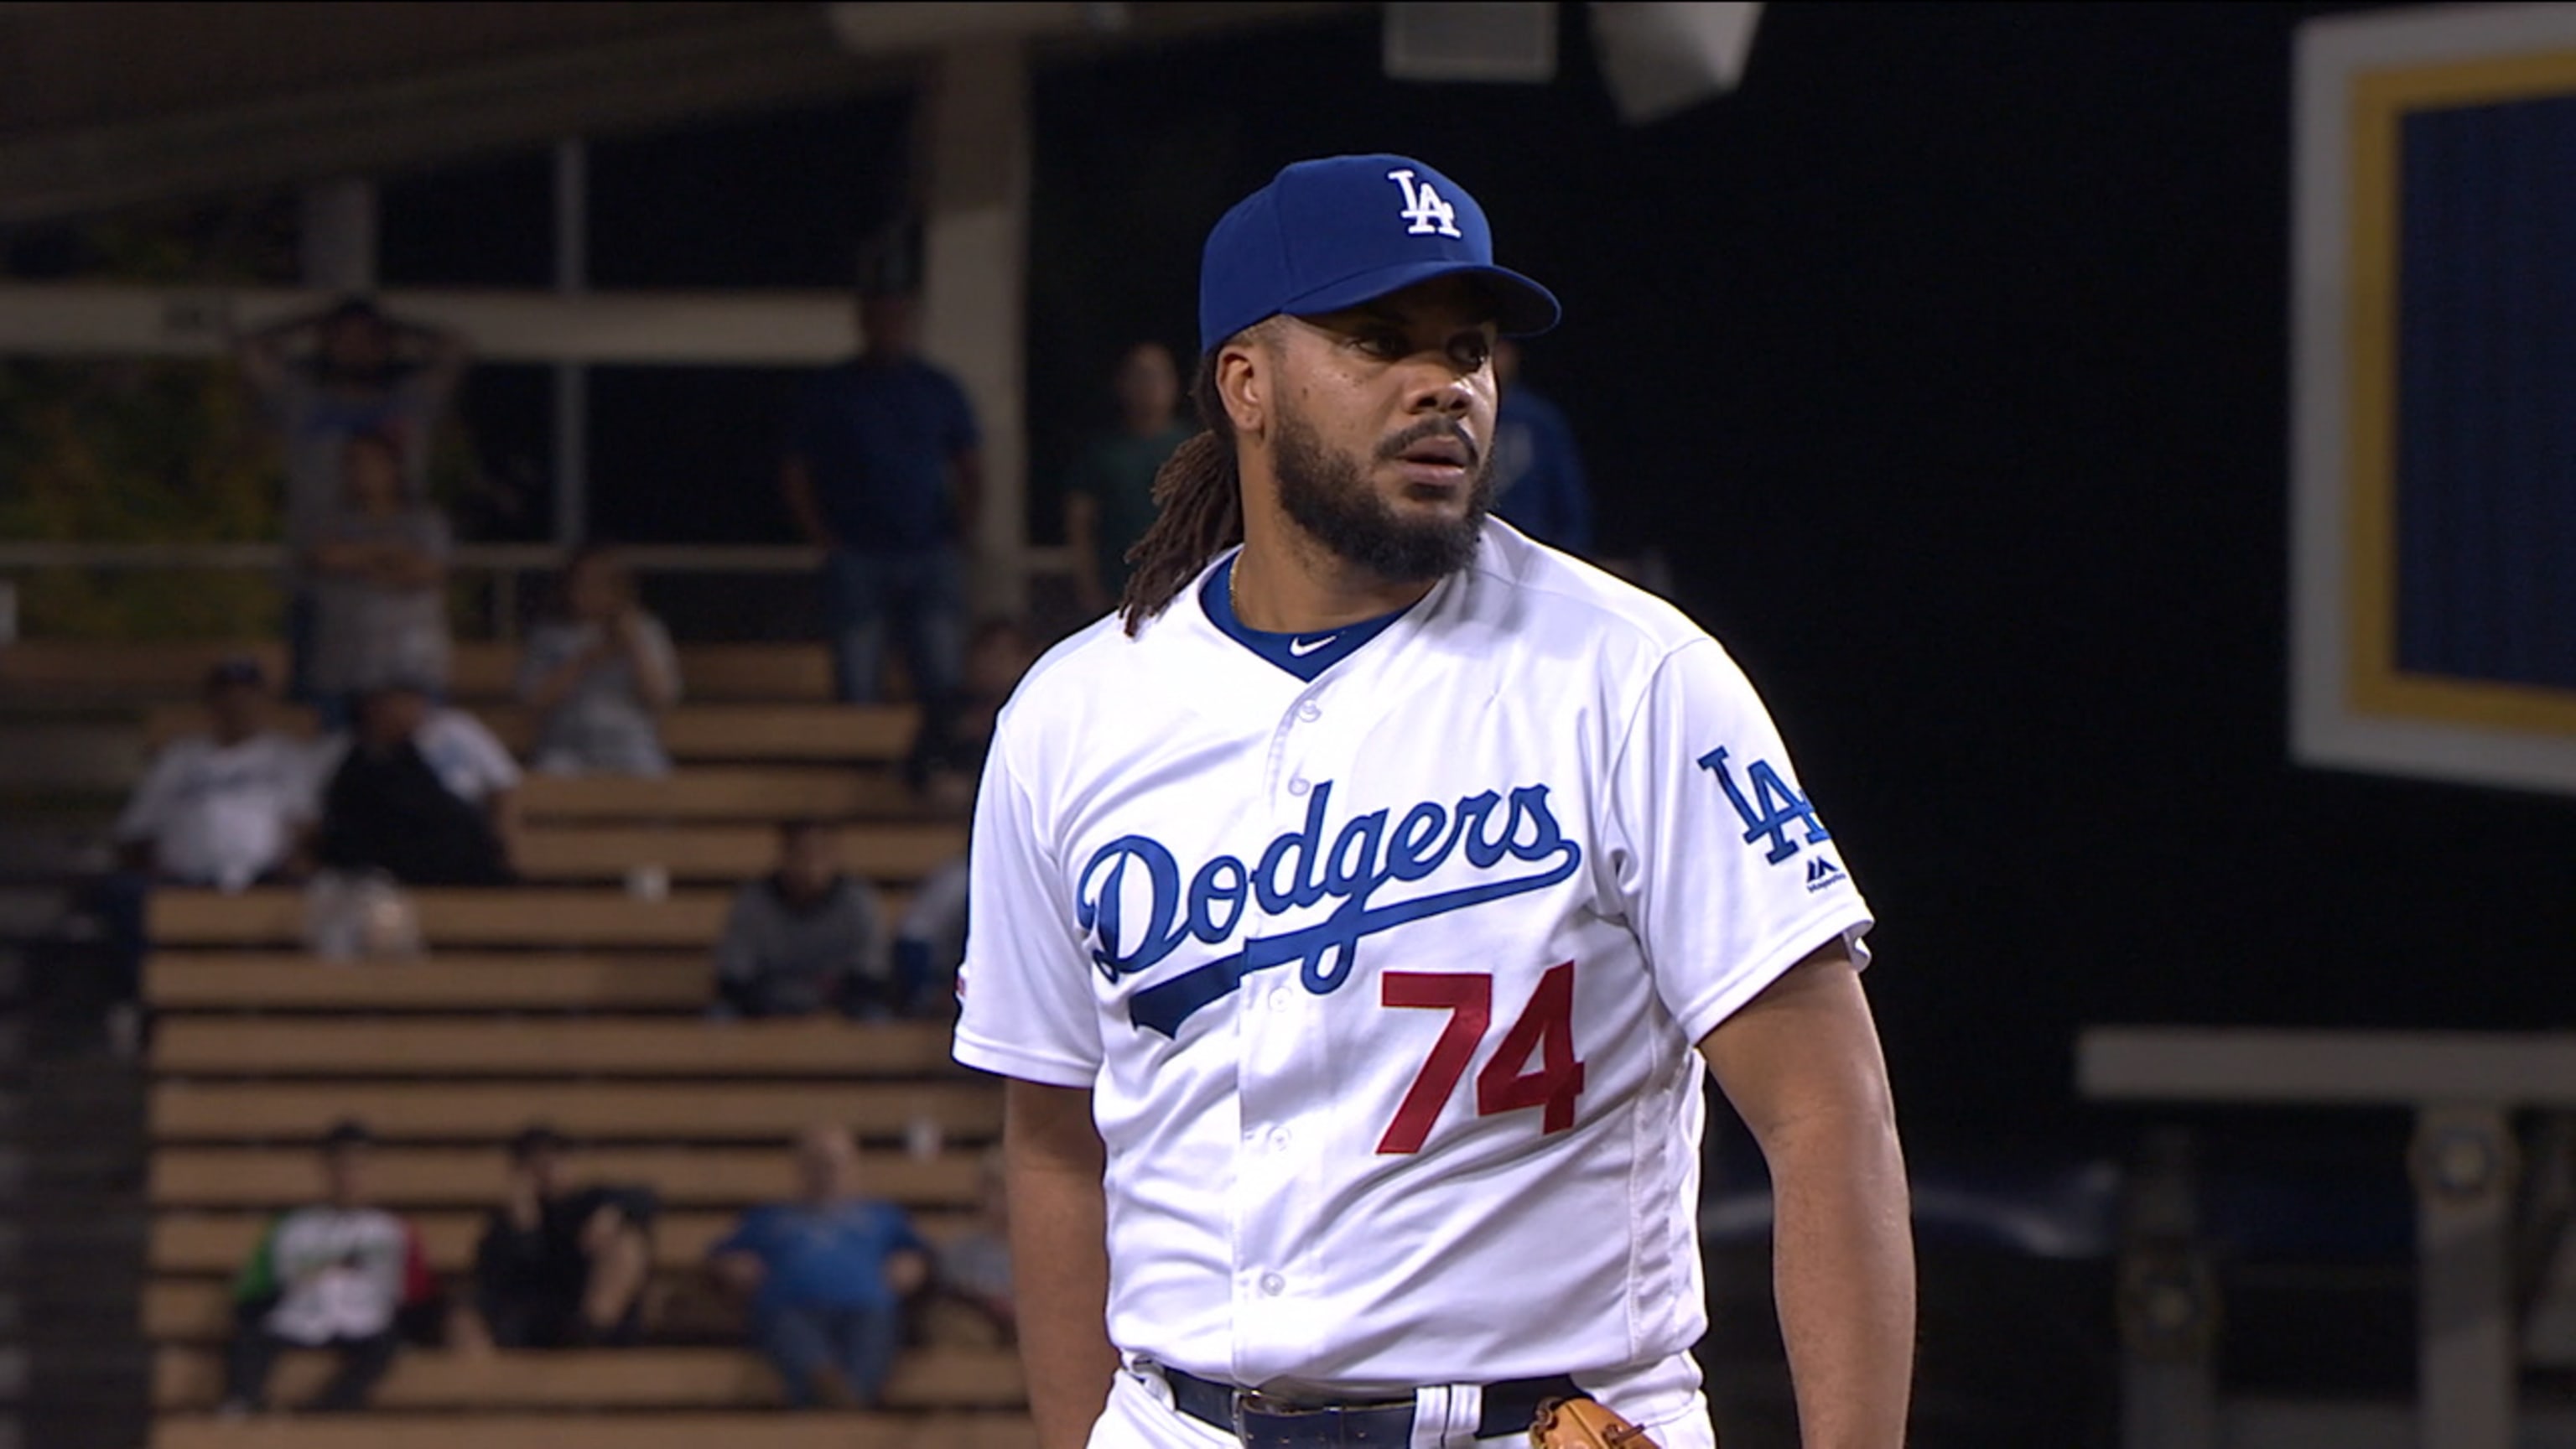 Dodgers closer Kenley Jansen is struggling and that's sad - Beyond the Box  Score